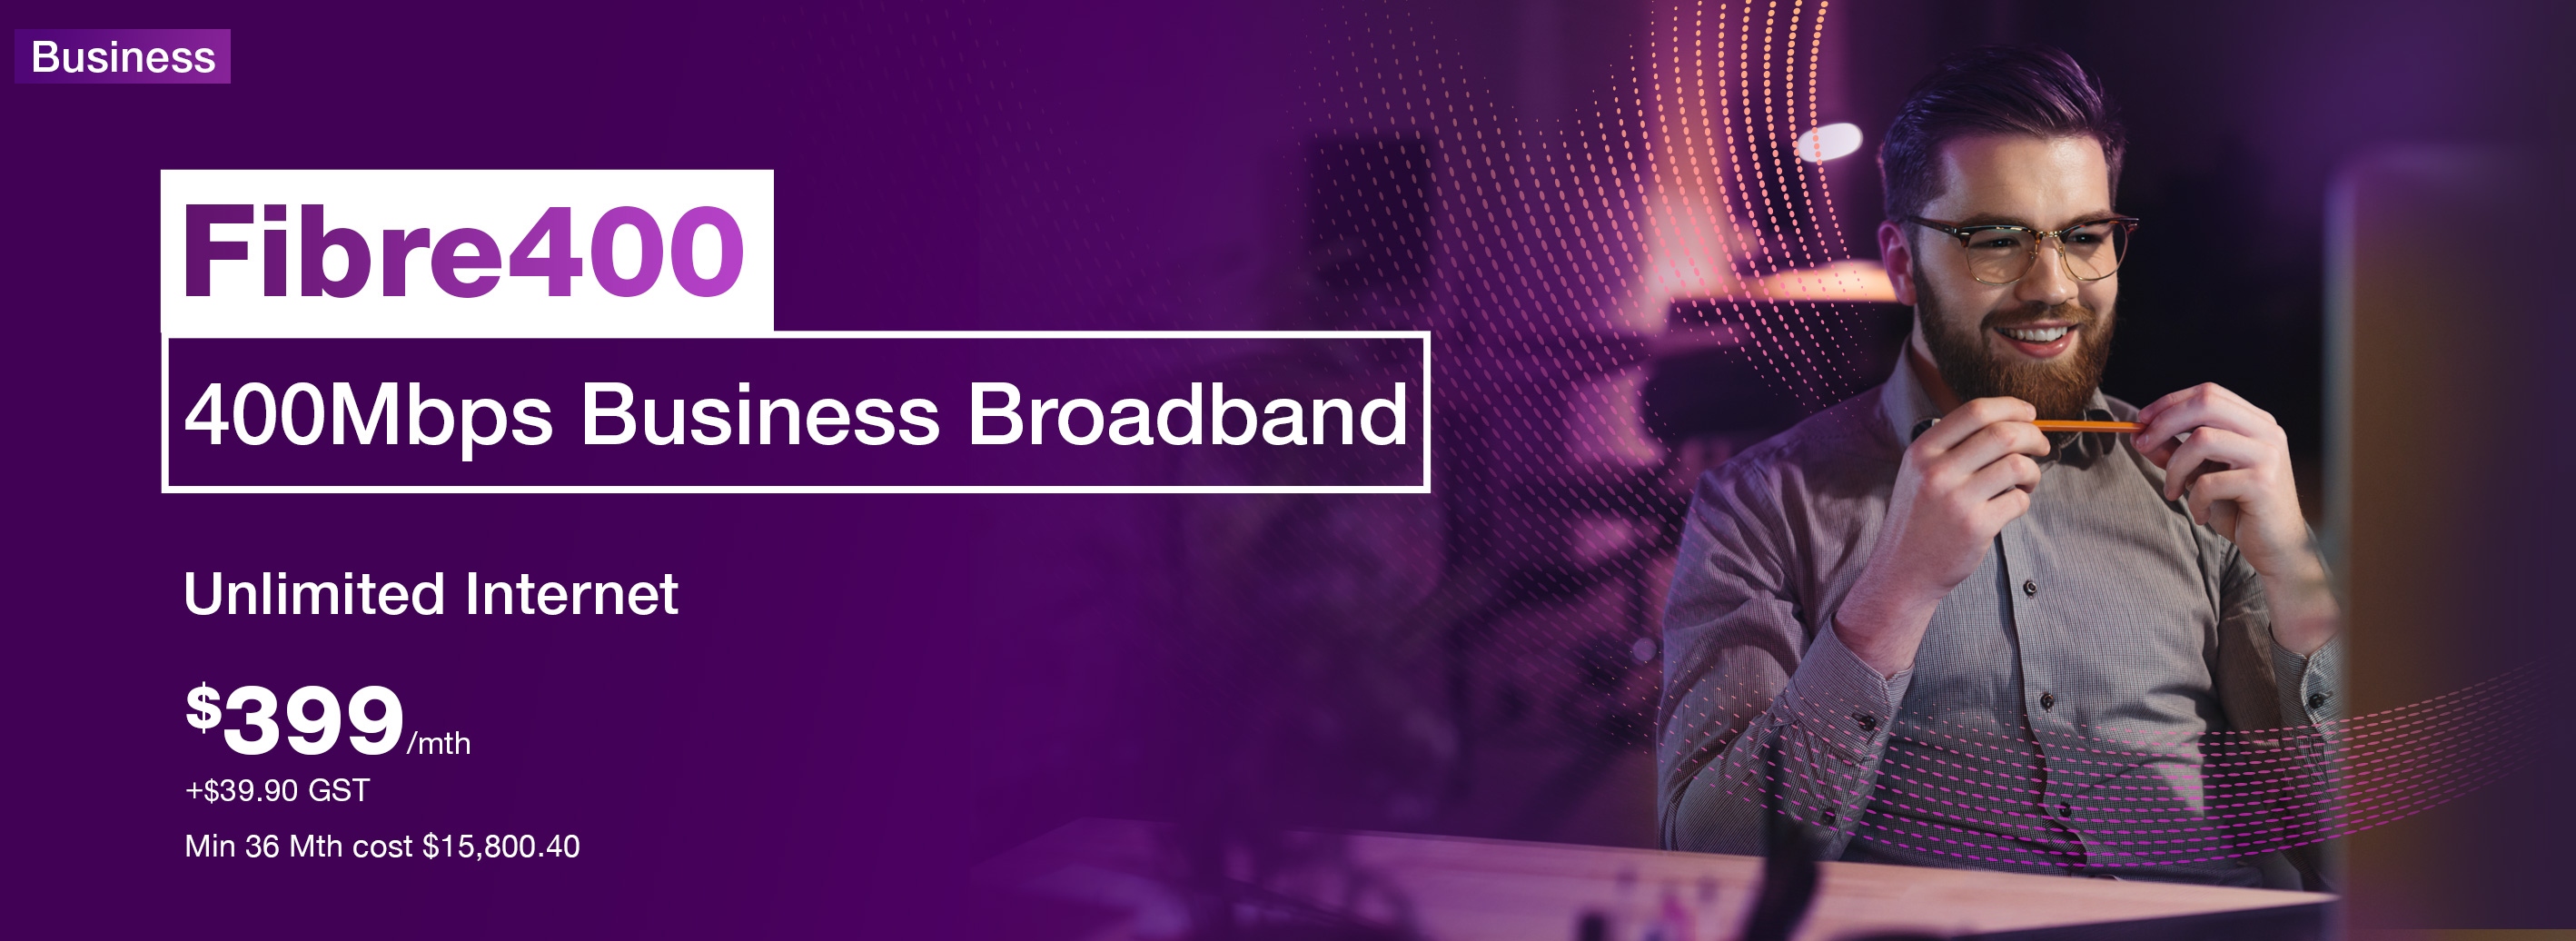 Drive your business further faster - Fibre400 Unlimited Internet at 400Mbps: $399 + $39.90 GST/month